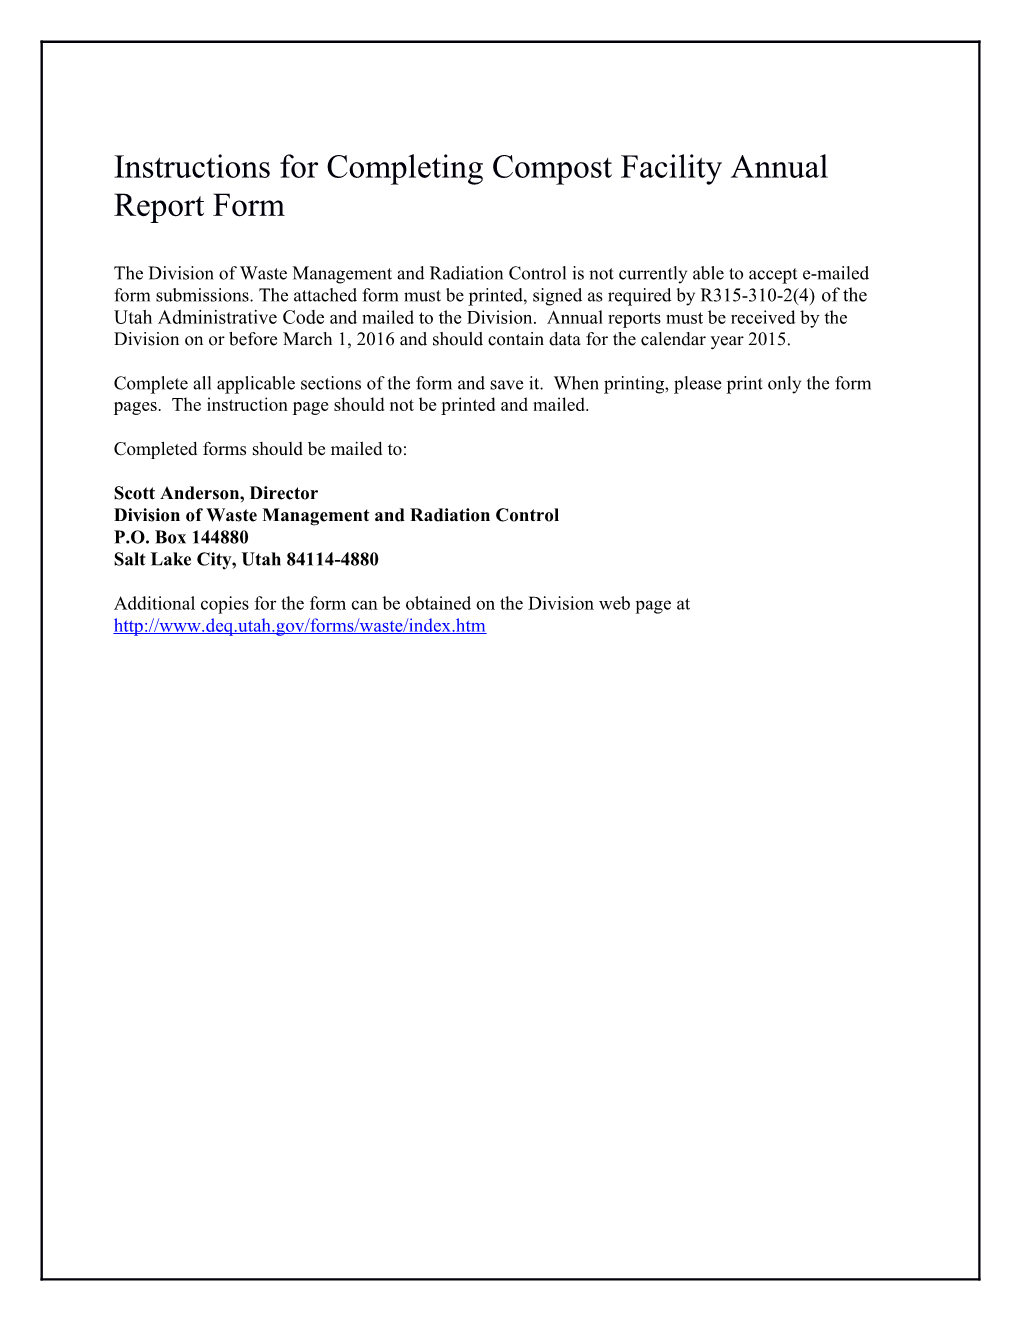 Instructions for Completing Compost Facility Annual Report Form